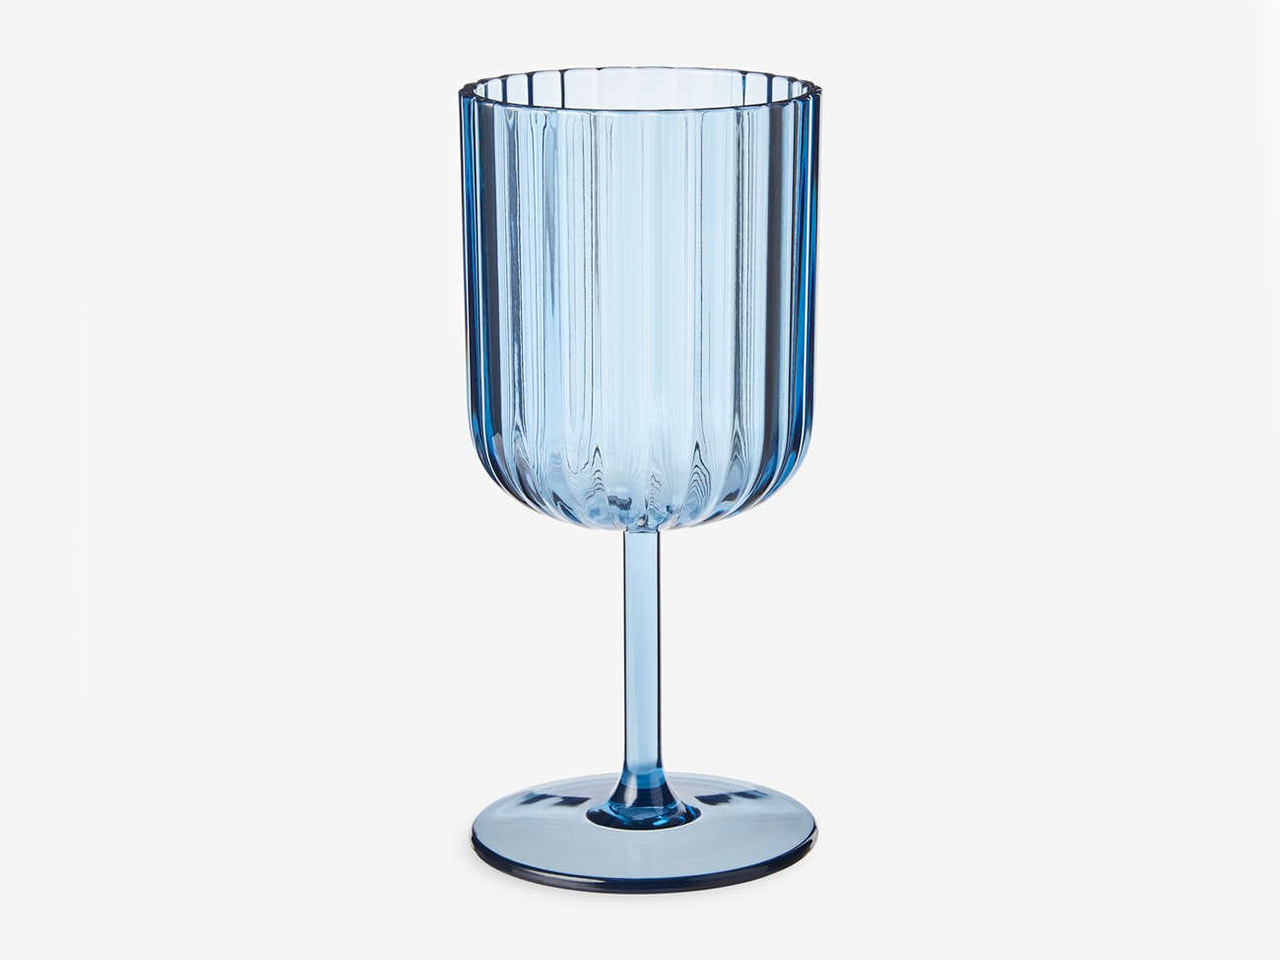 A plastic fluted blue wine goblet from Joe Fresh for outdoor entertaining.